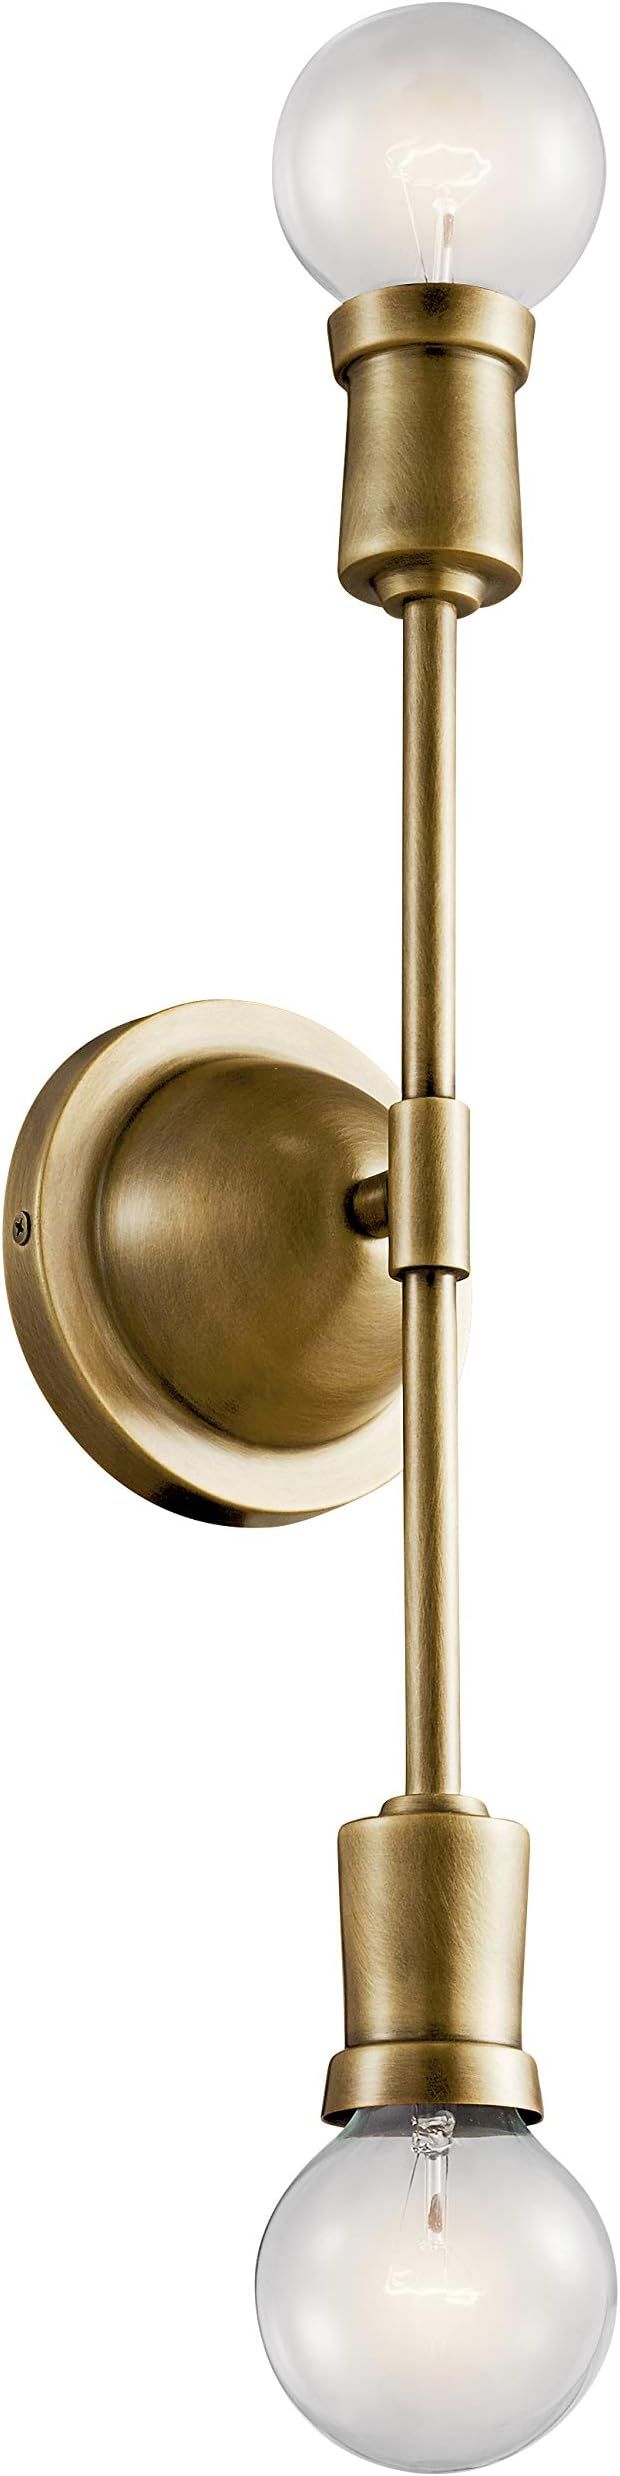 Kichler Armstrong 5" Wall Sconce Natural Brass | Amazon (US)